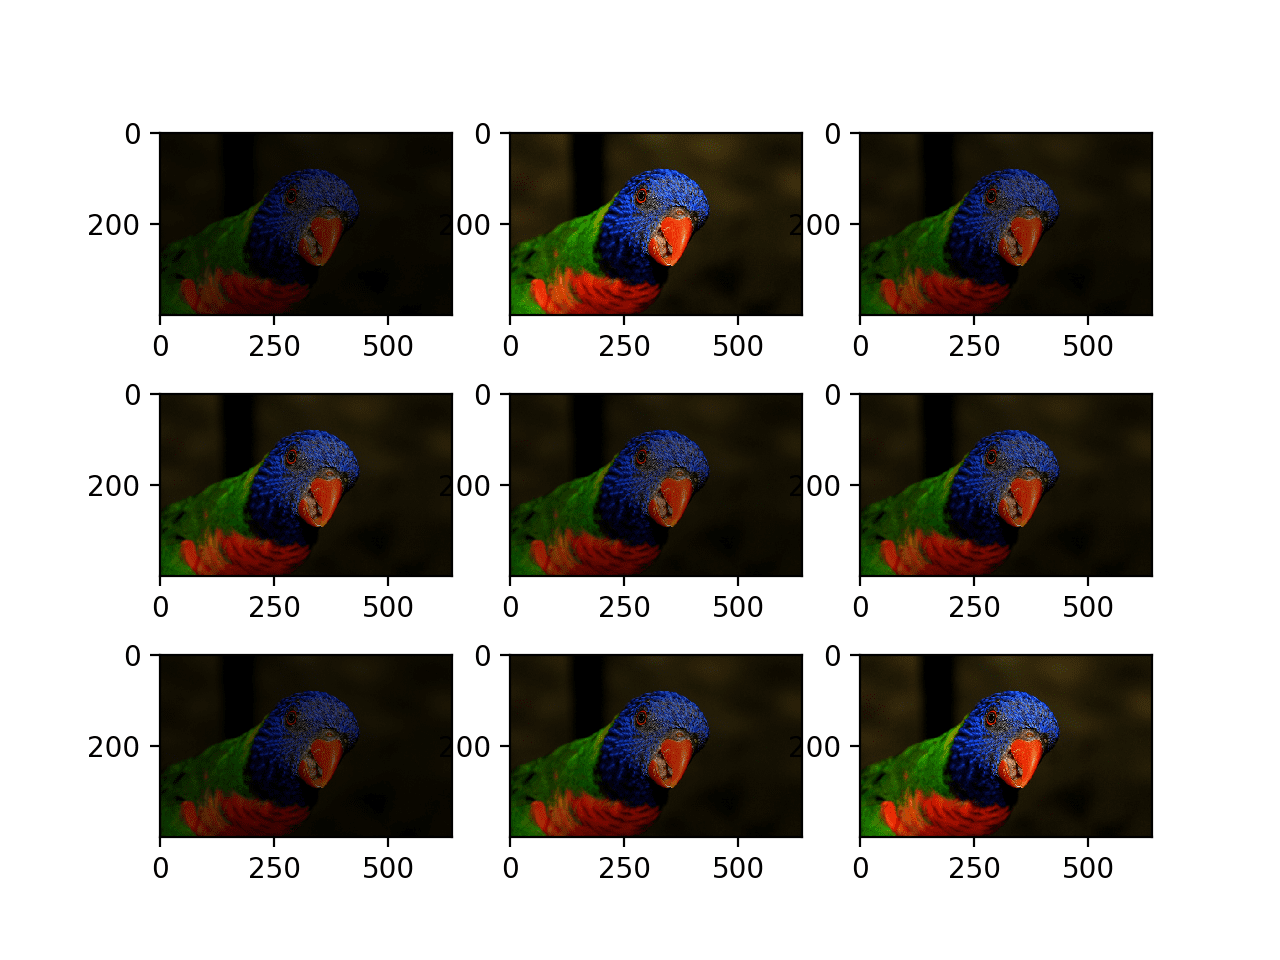 Plot of Images Generated With a Random Brightness Augmentation